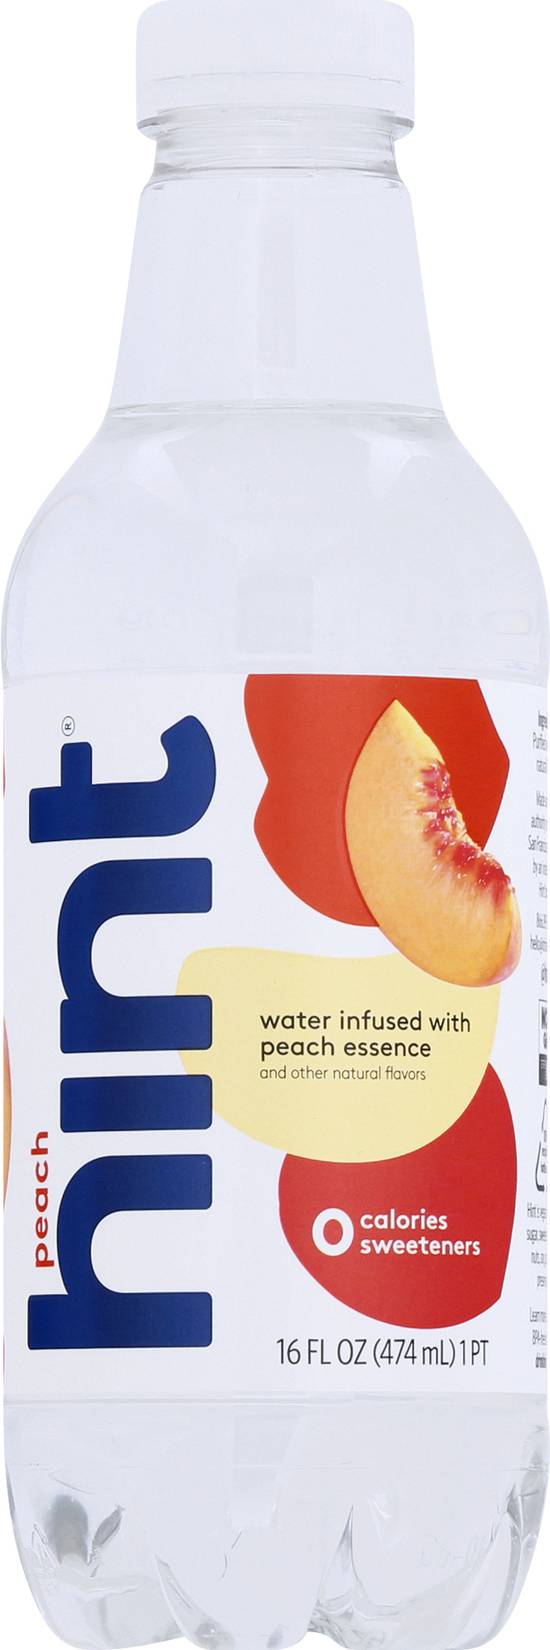 Hint Unsweet Peach Infused Water (16 fl oz)